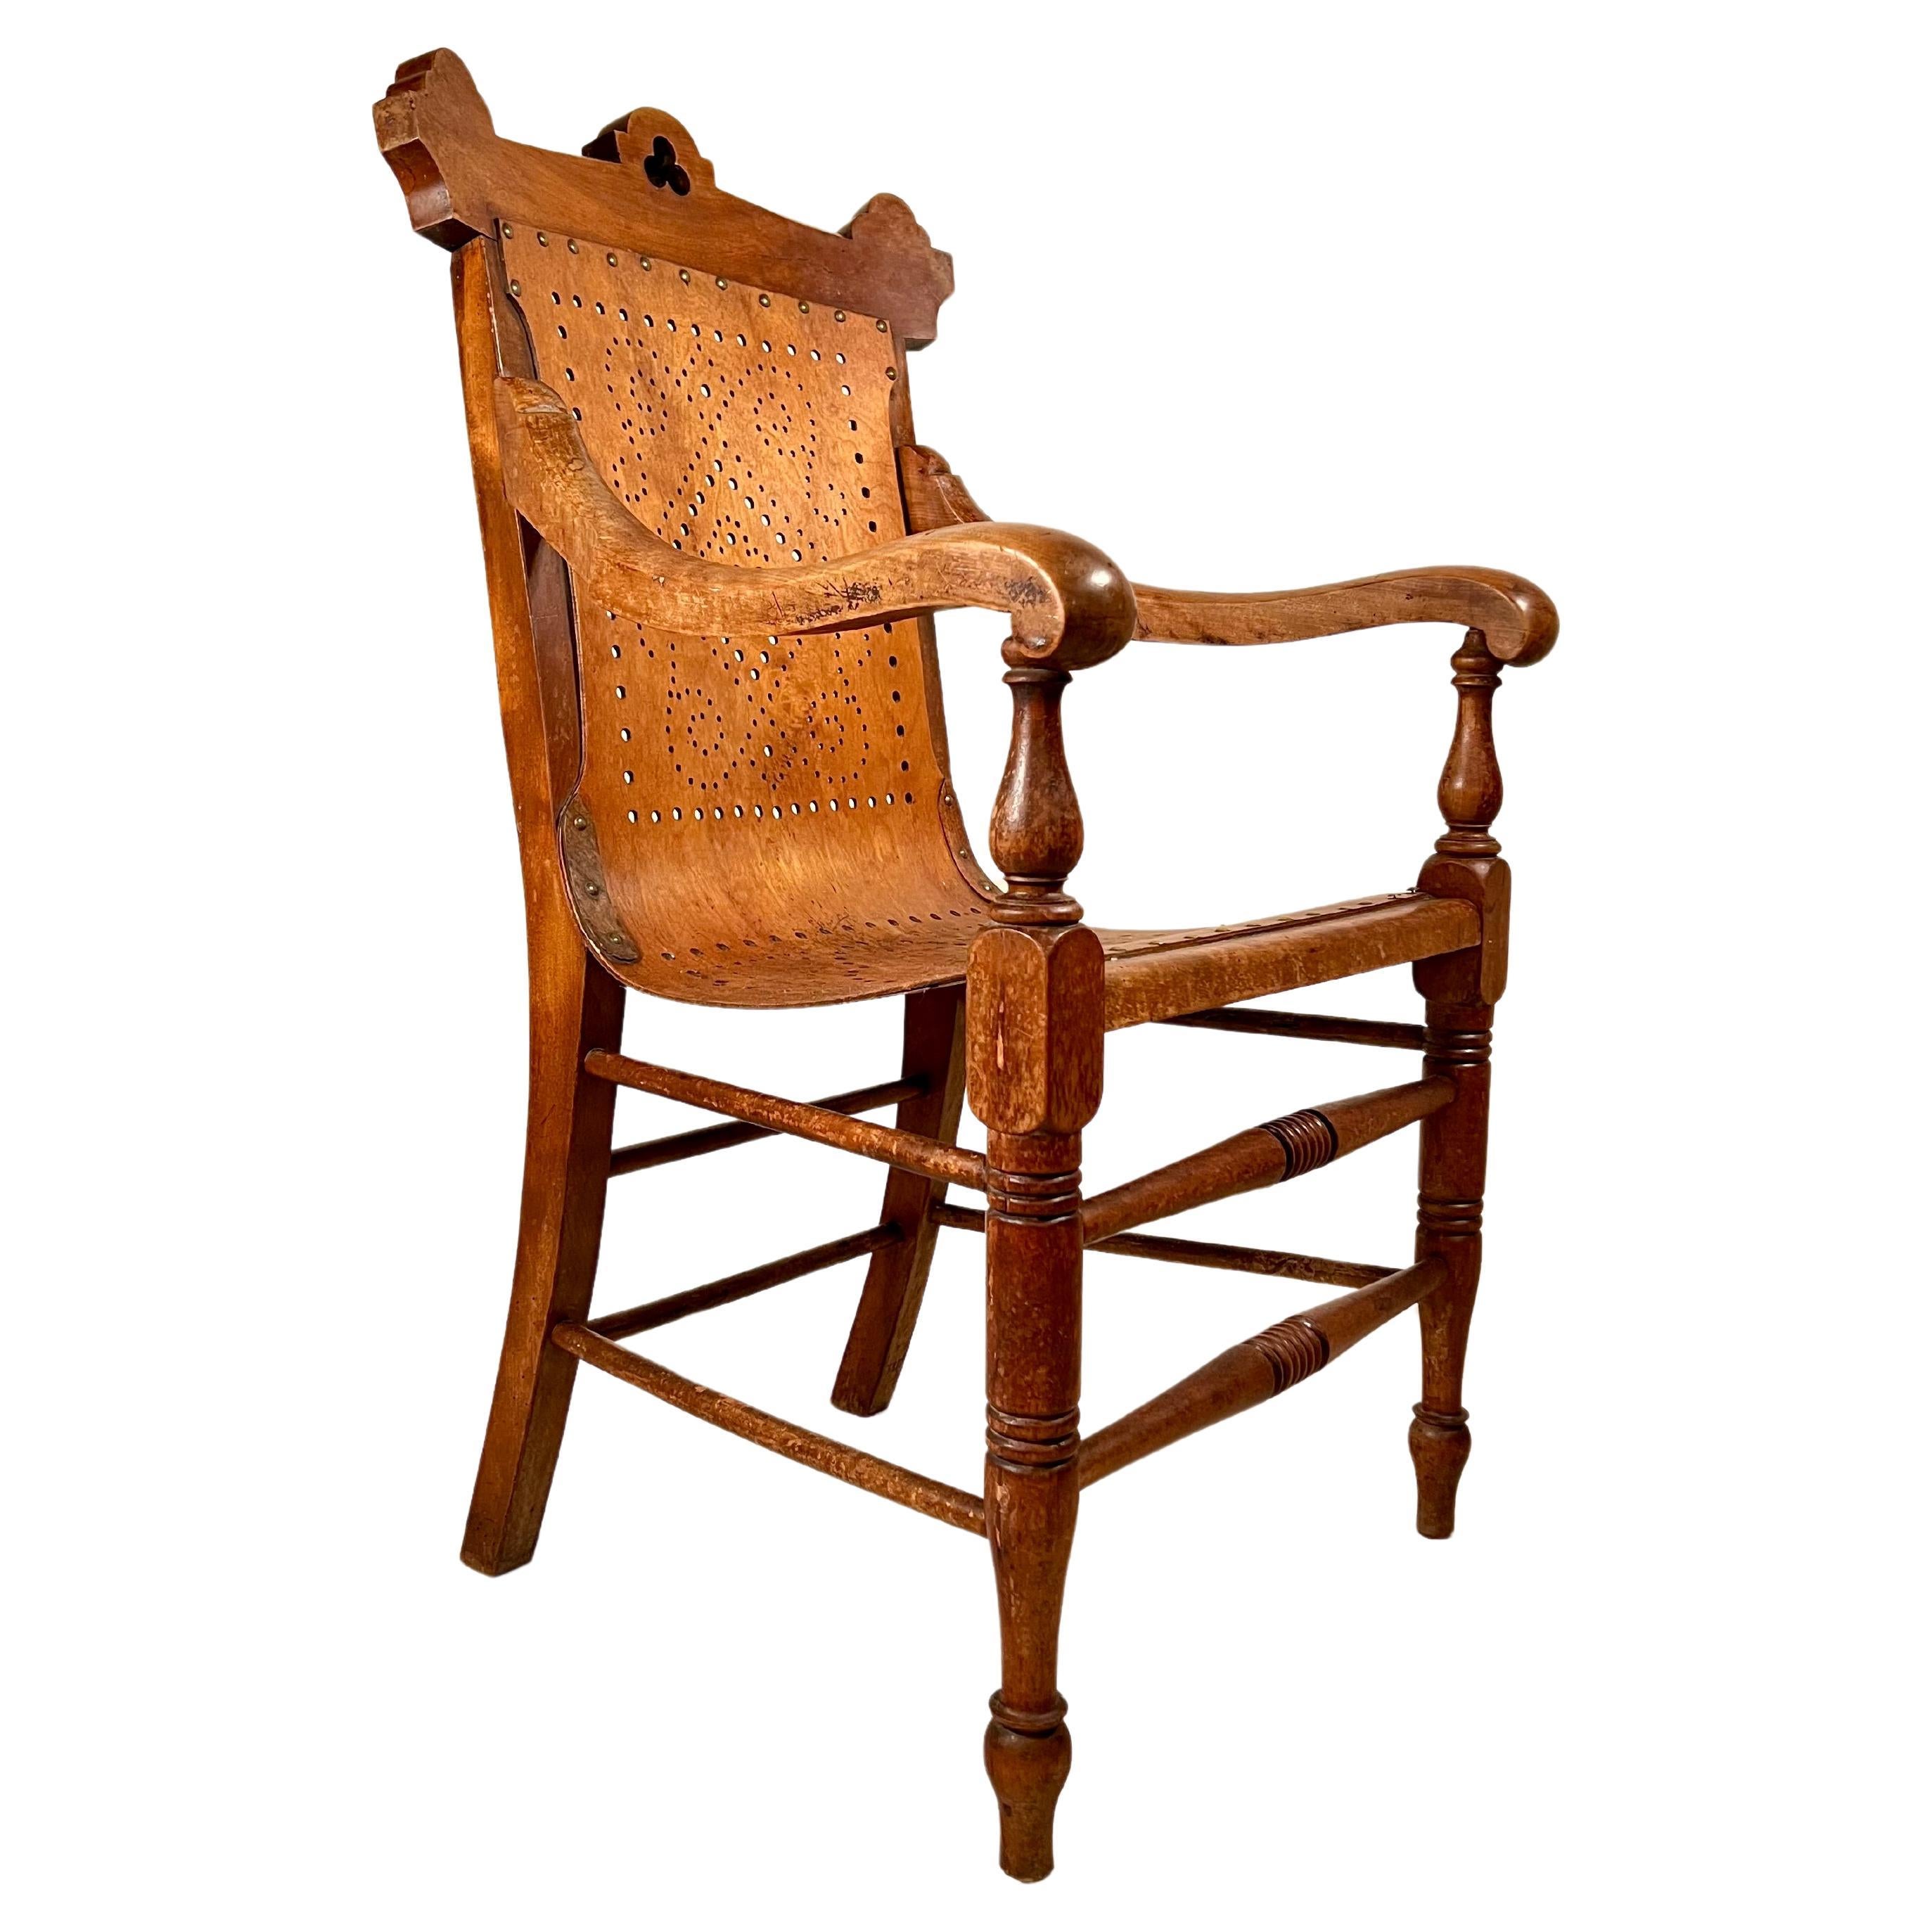 Gardner & Co. Pierced Bent Ply and Oak Frame Arm Chair c.1872 For Sale